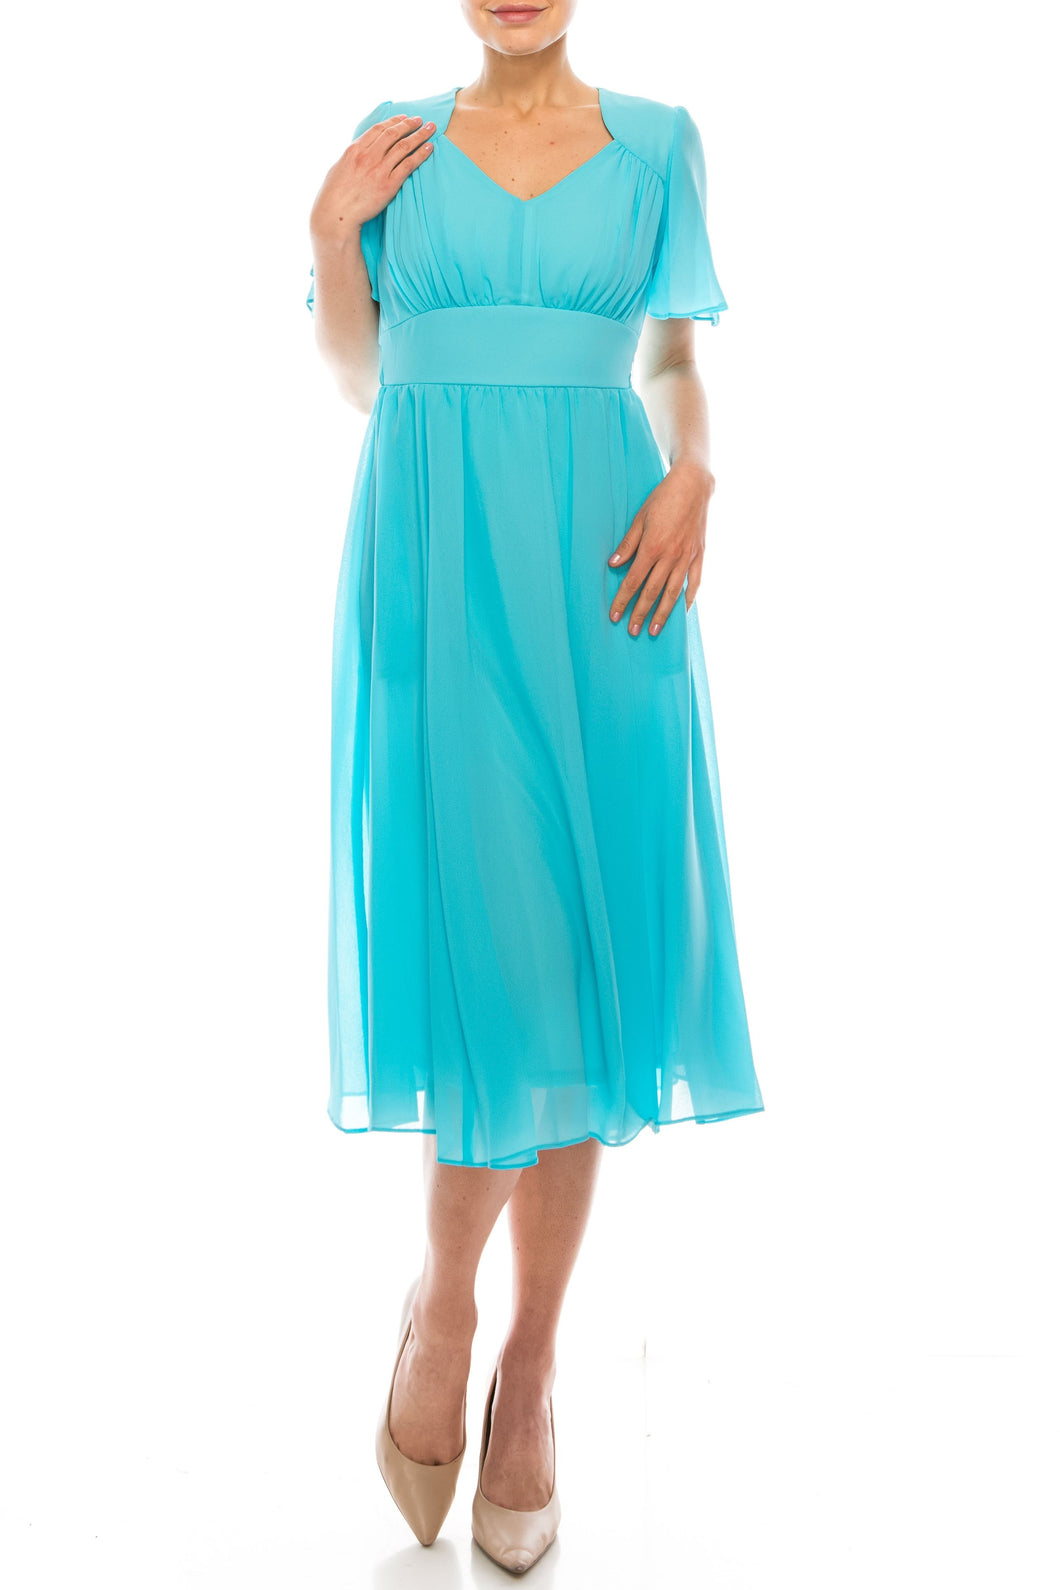 Gabby Skye Turquoise Crepe Chiffon Midi, SM Sizes 6 & 8 ONLY! Women's Day Dress, Casual, Office Apparel